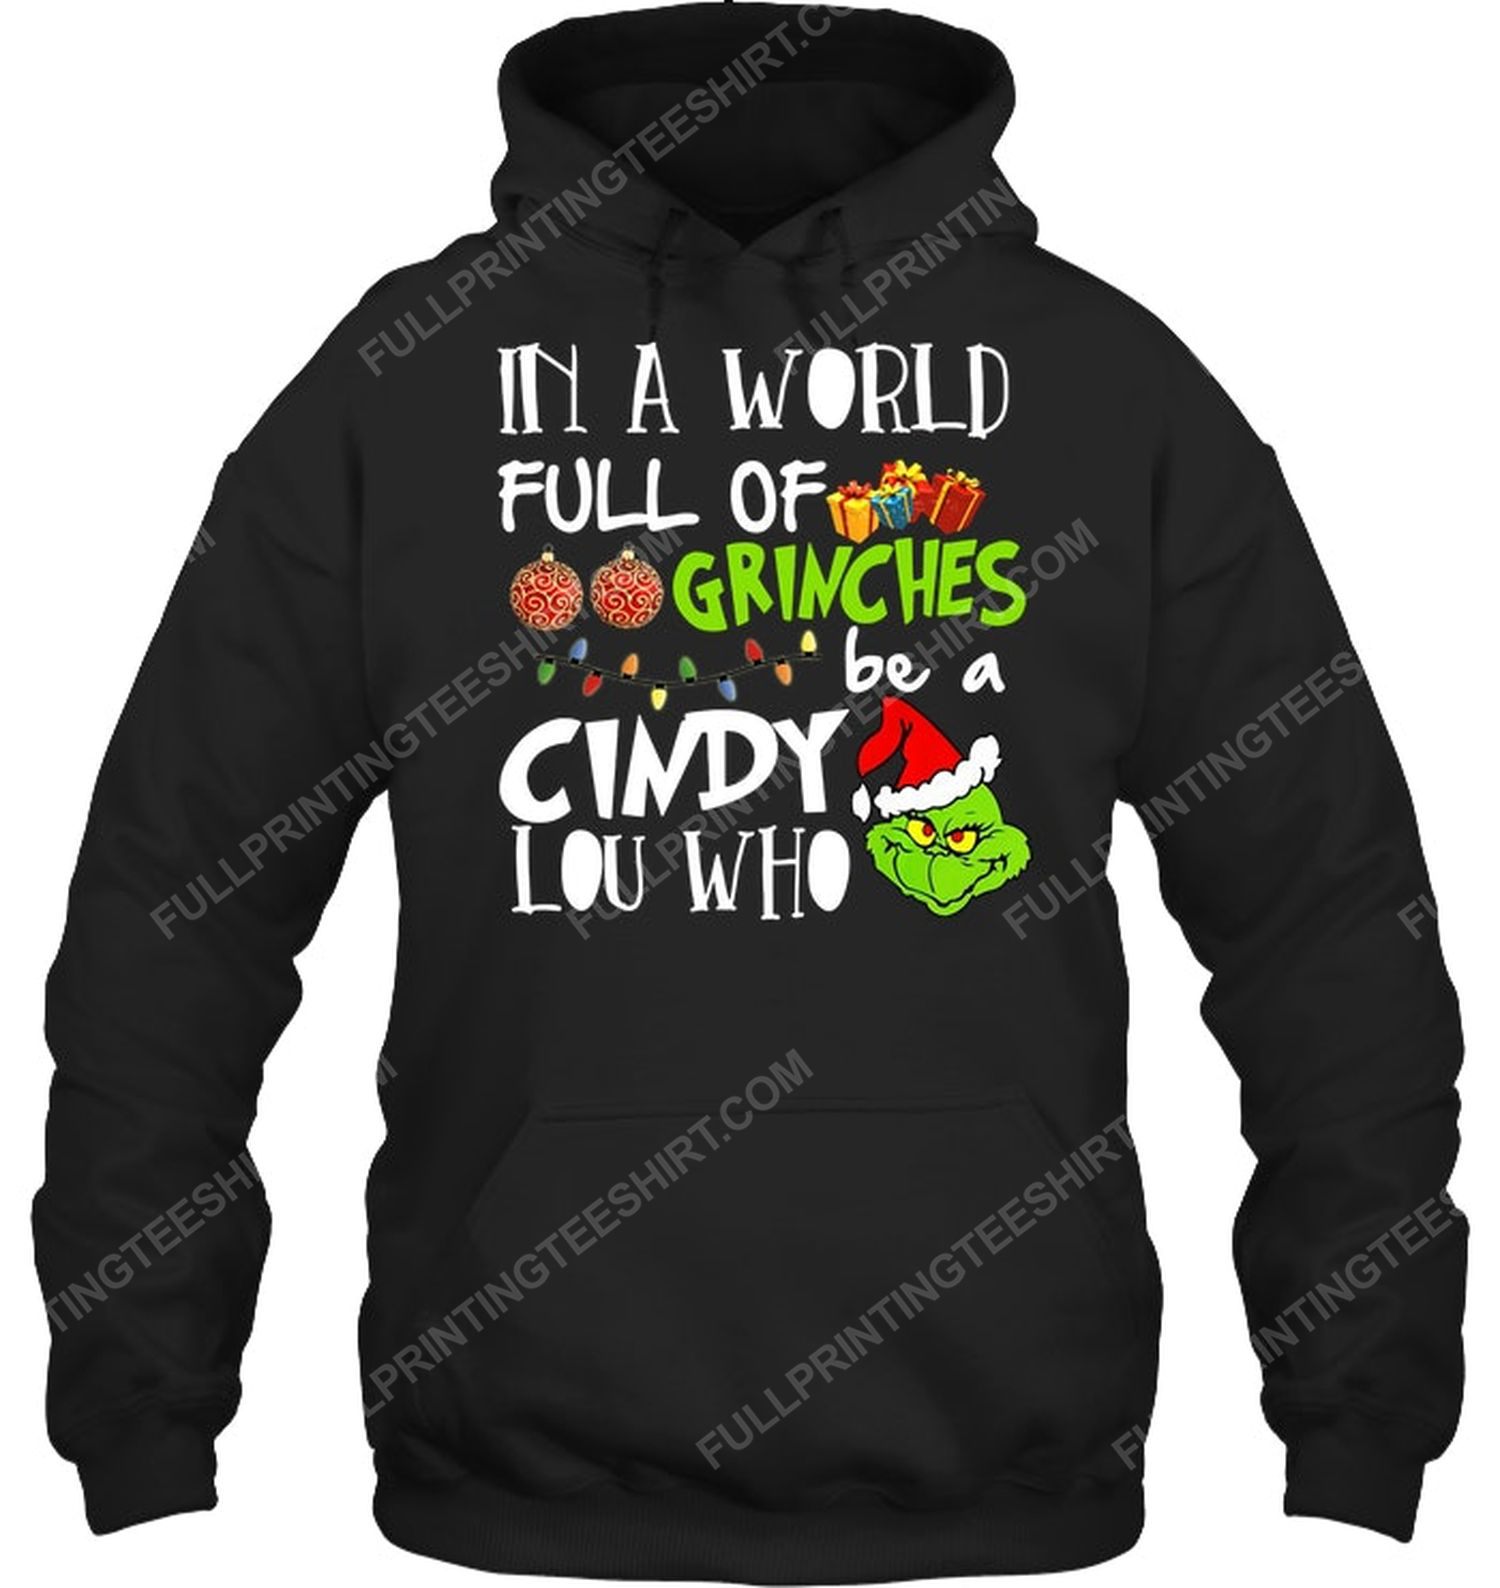 In a world grinches be a cindy lou who hoodie